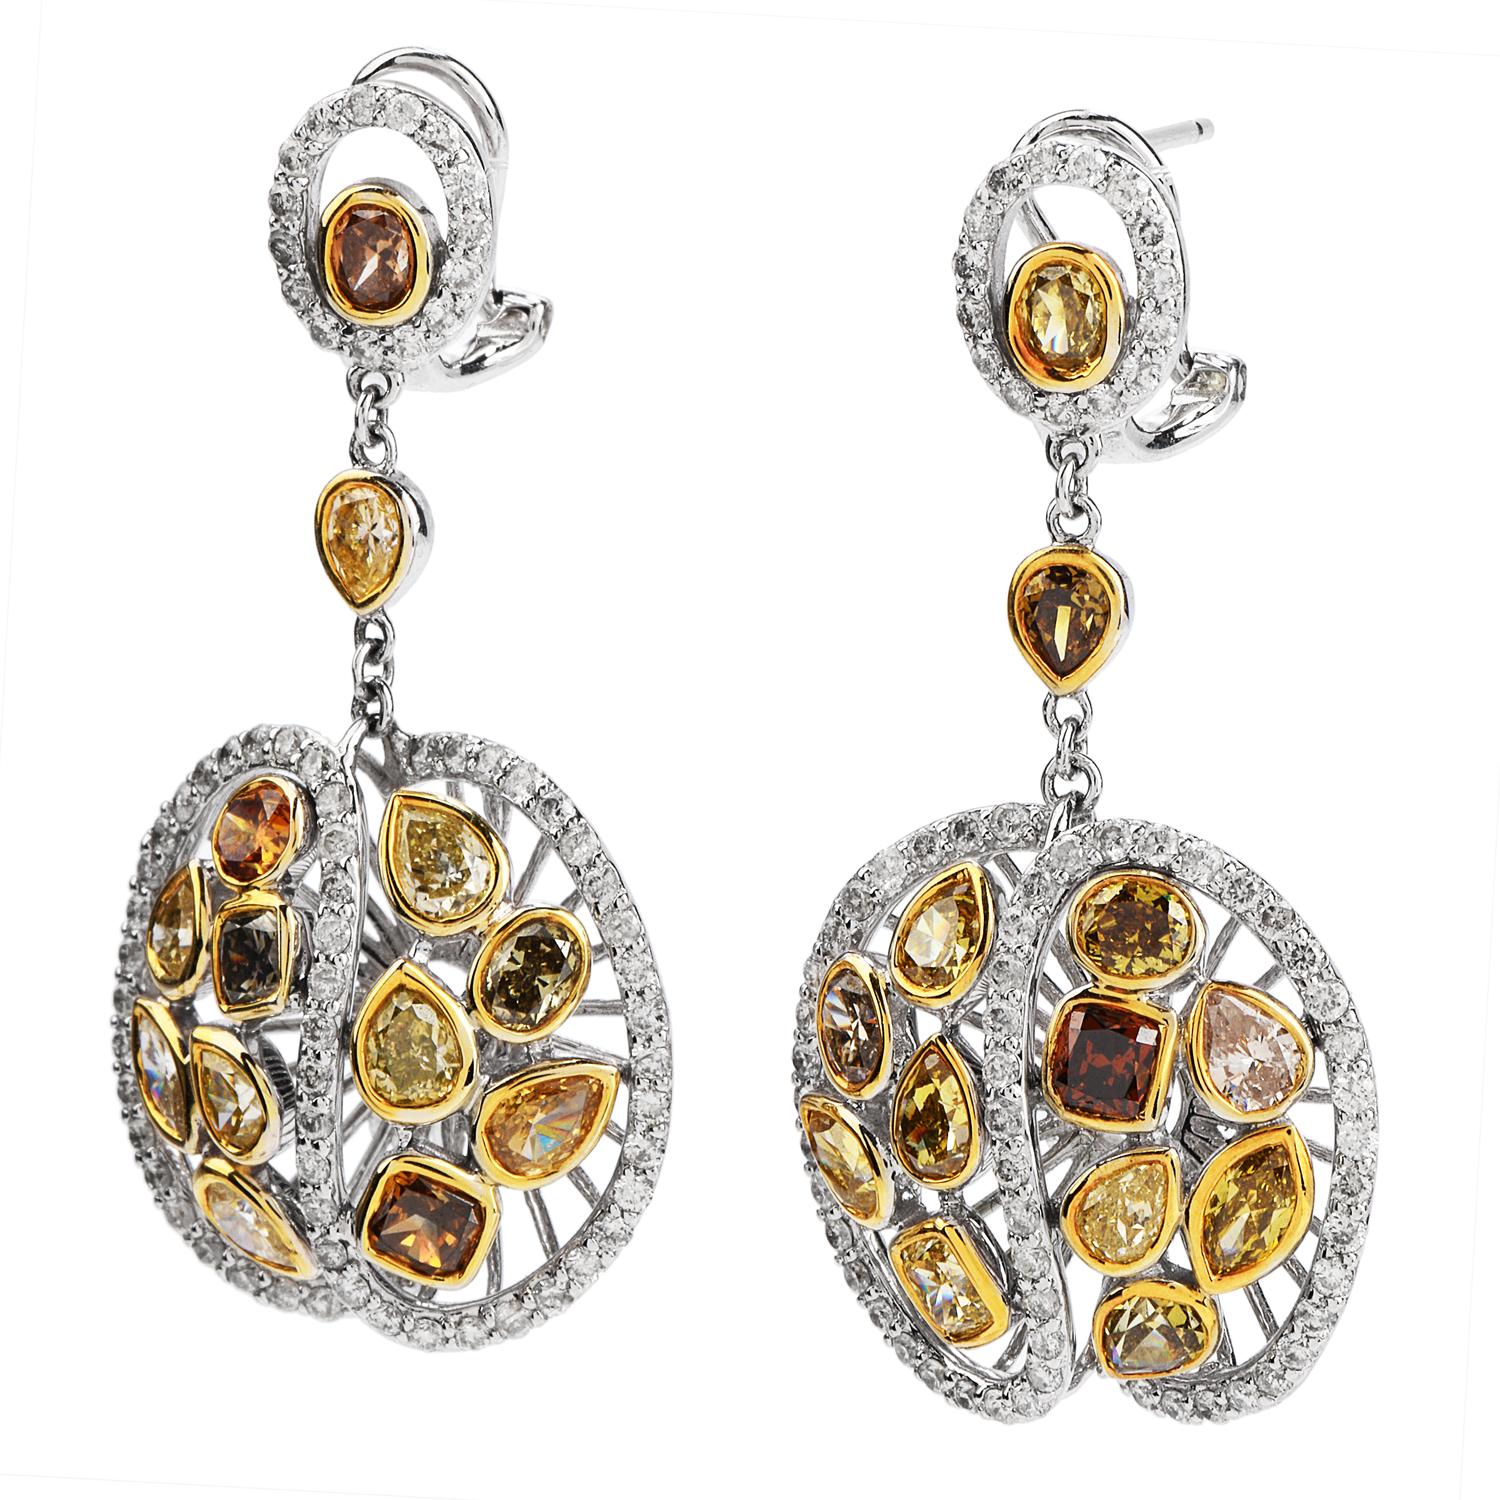 These romantic earrings have circle motifs and swirling flower designs throughout. They are crafted in 14 karat yellow and white gold.

 Set with approximately 22 genuine fancy color diamond with various shape from yellow green to deep orange,